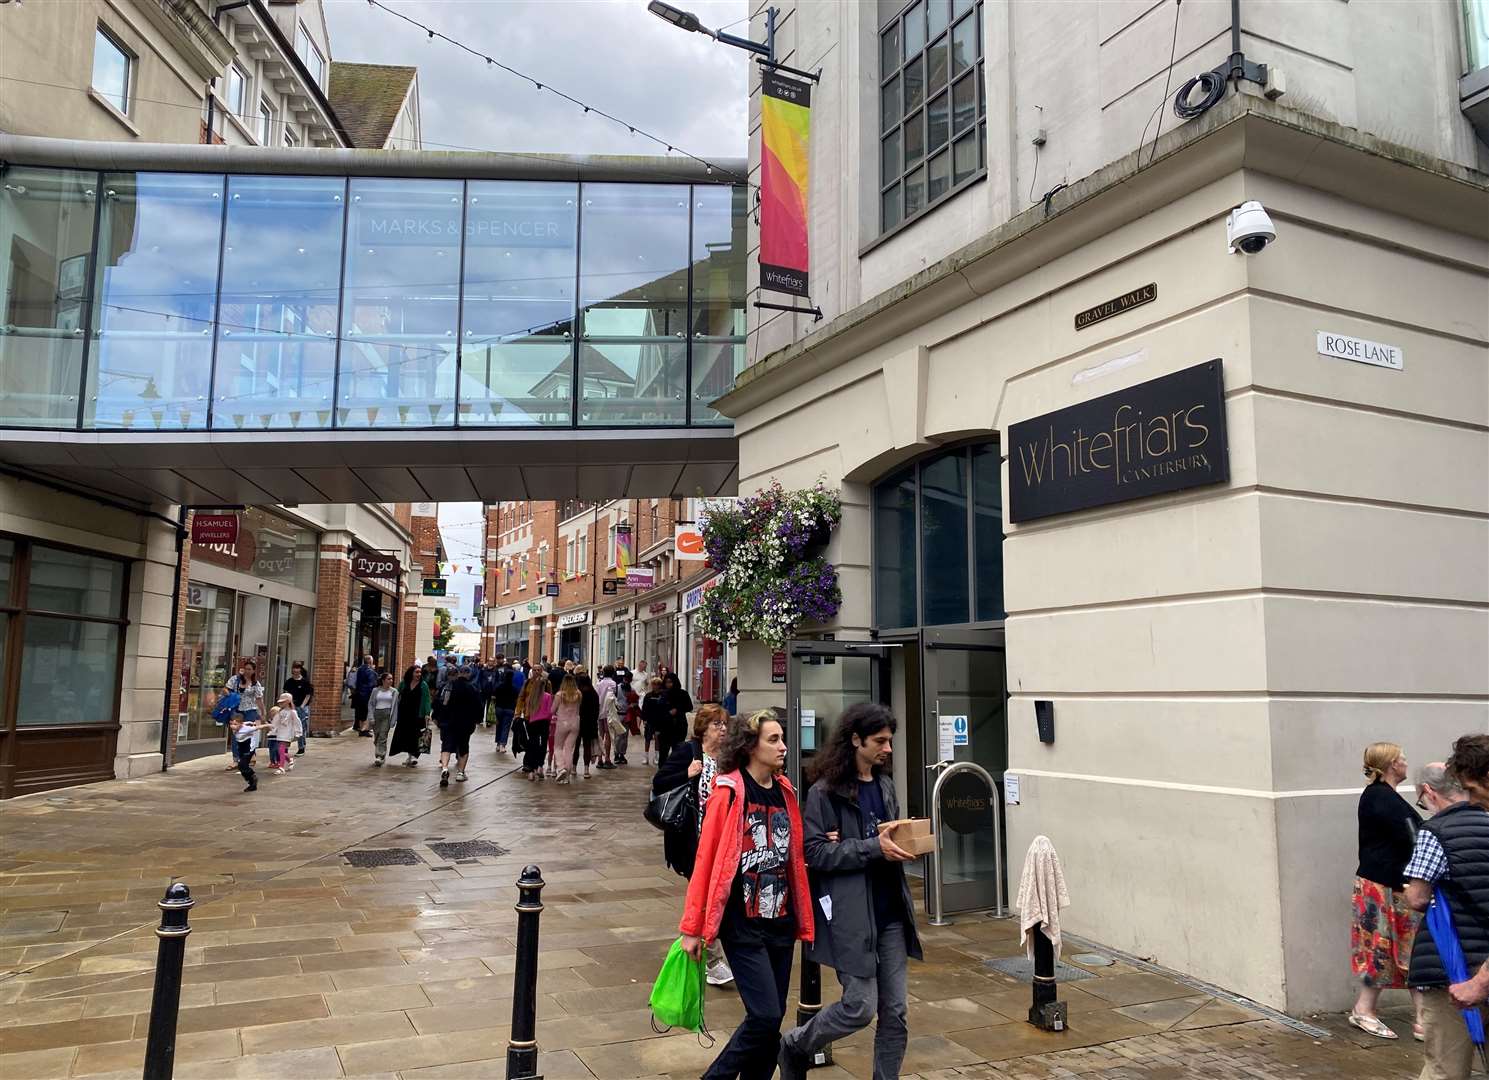 Whitefriars is one of the busiest shopping areas in the city